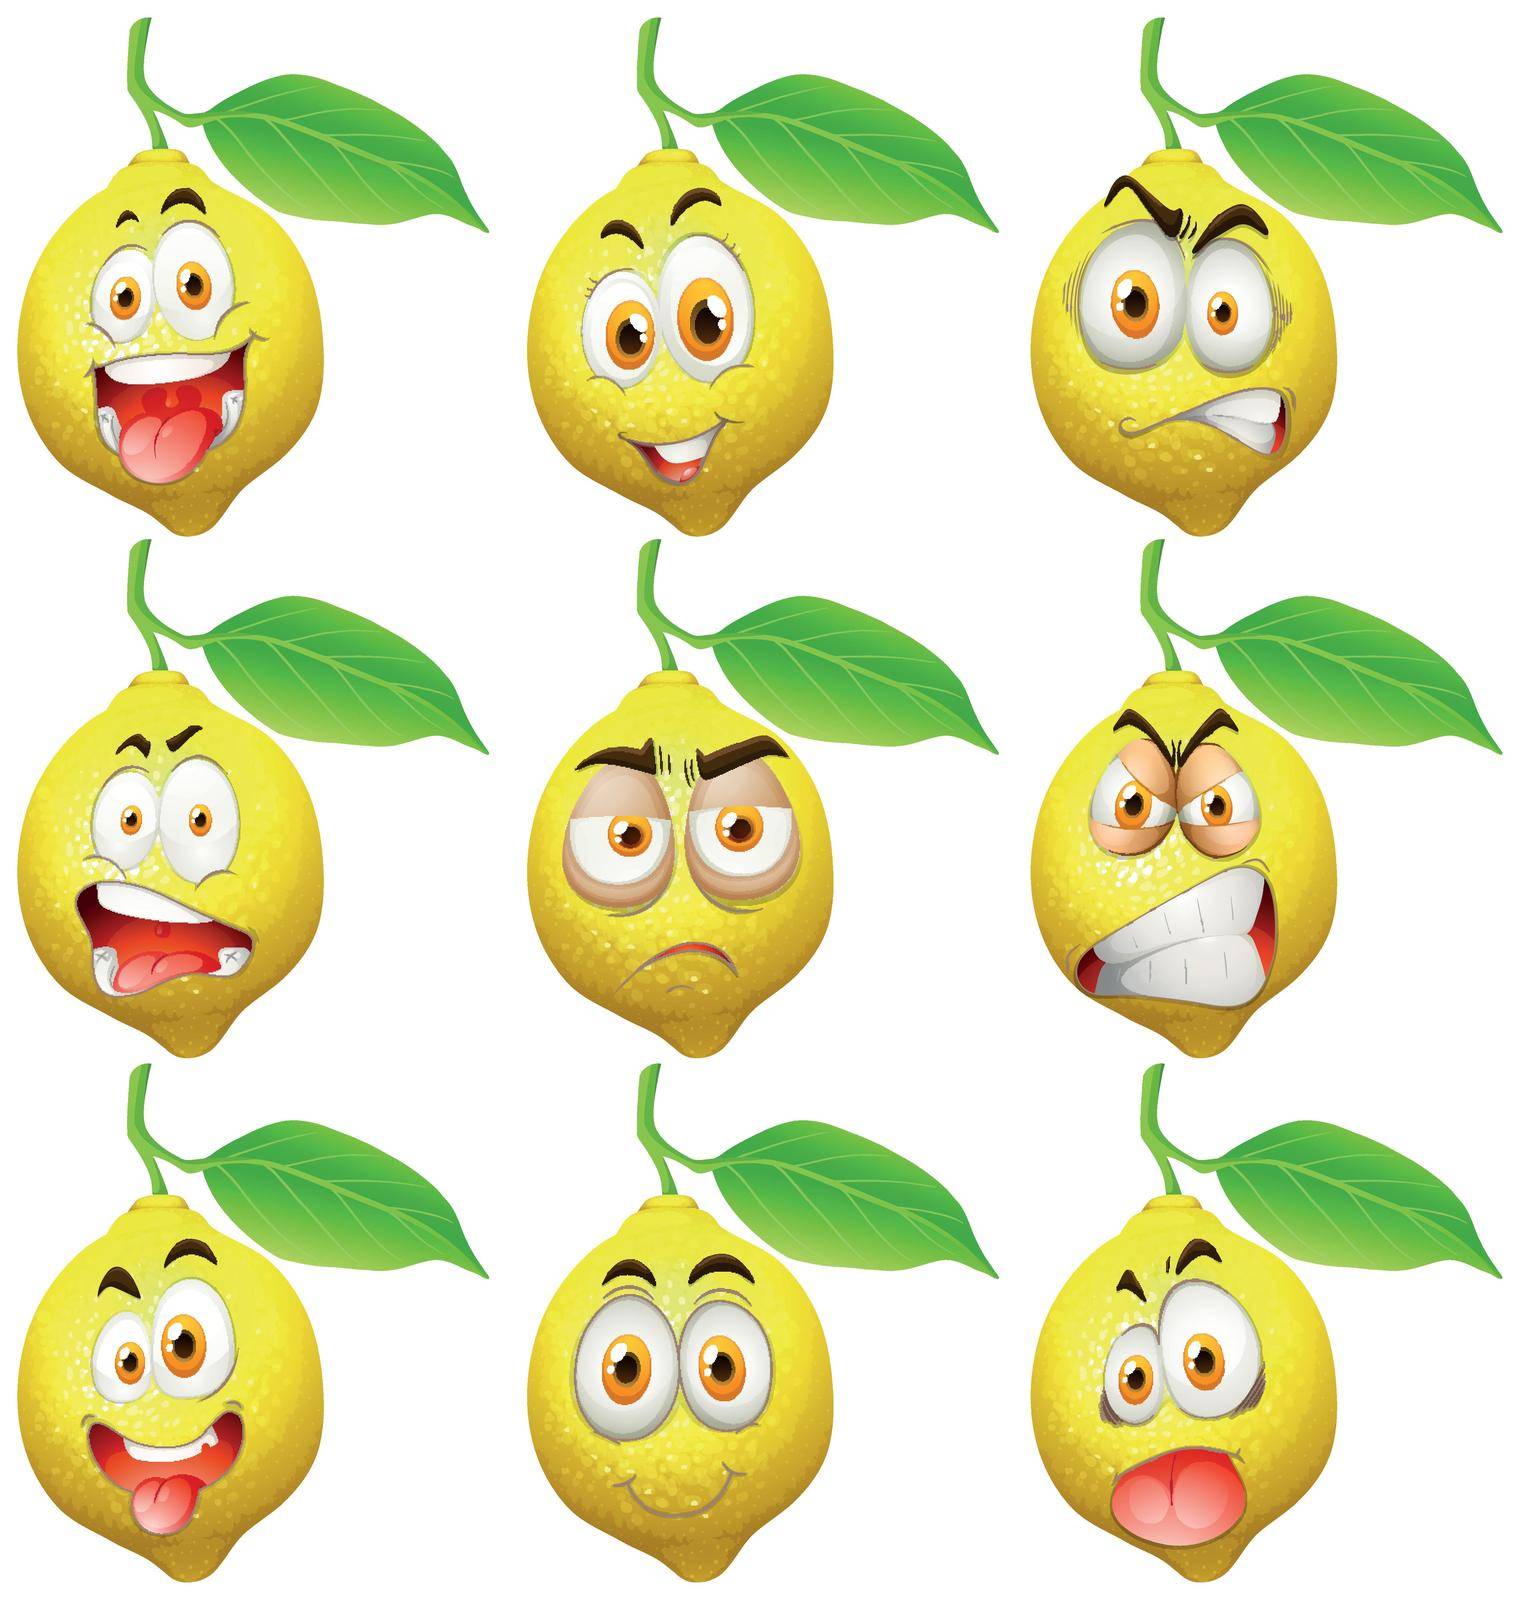 Fresh lemon with facial expressions by iimages